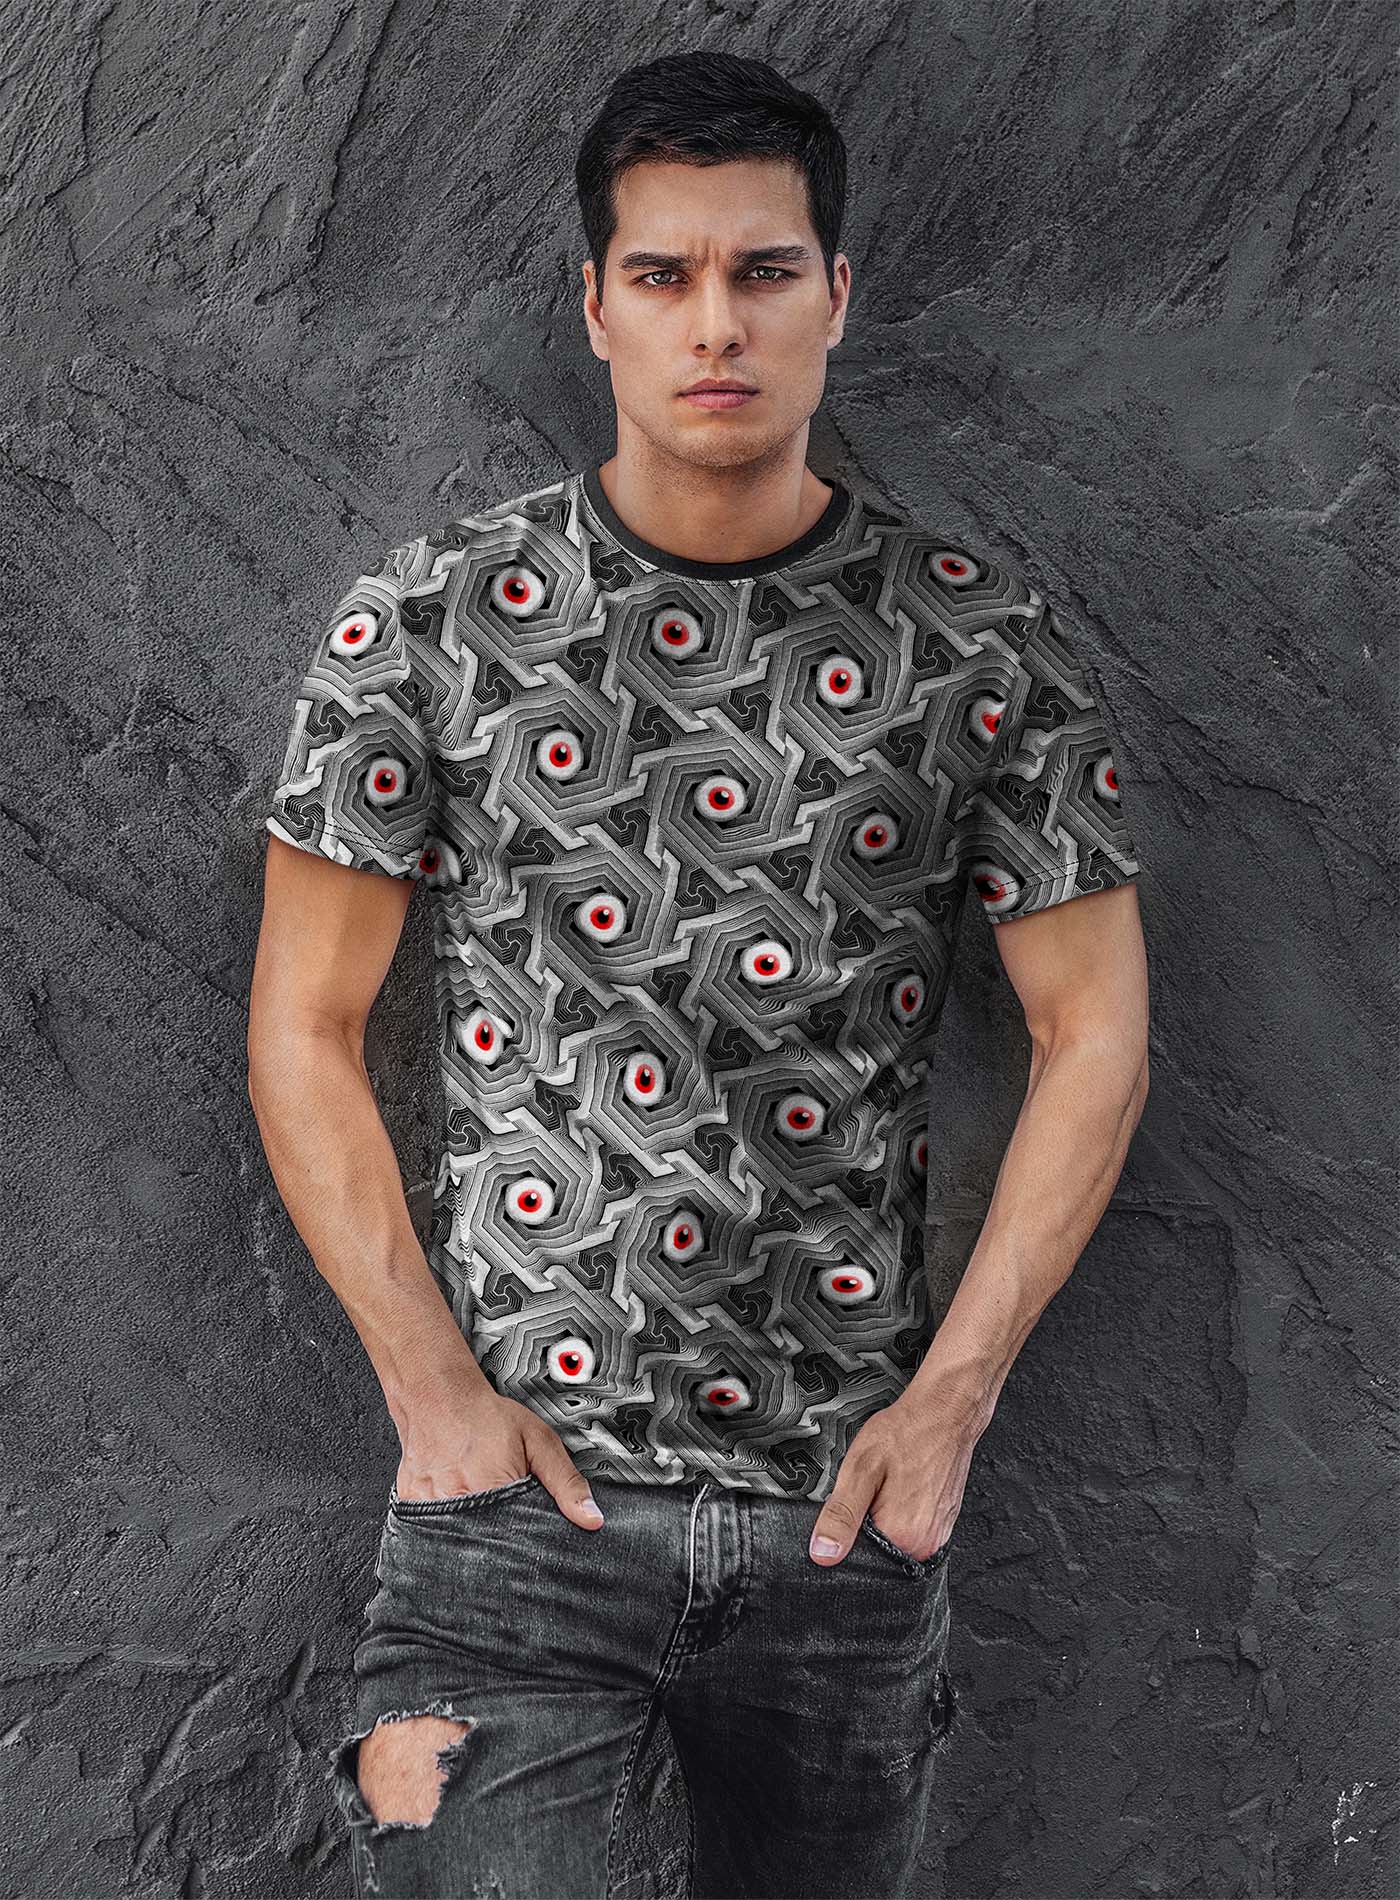 Man modeling an All over dye sublimation t-shirt featuring a pattern of red zombie eyes inspired by islamic ornamental art by Topo.